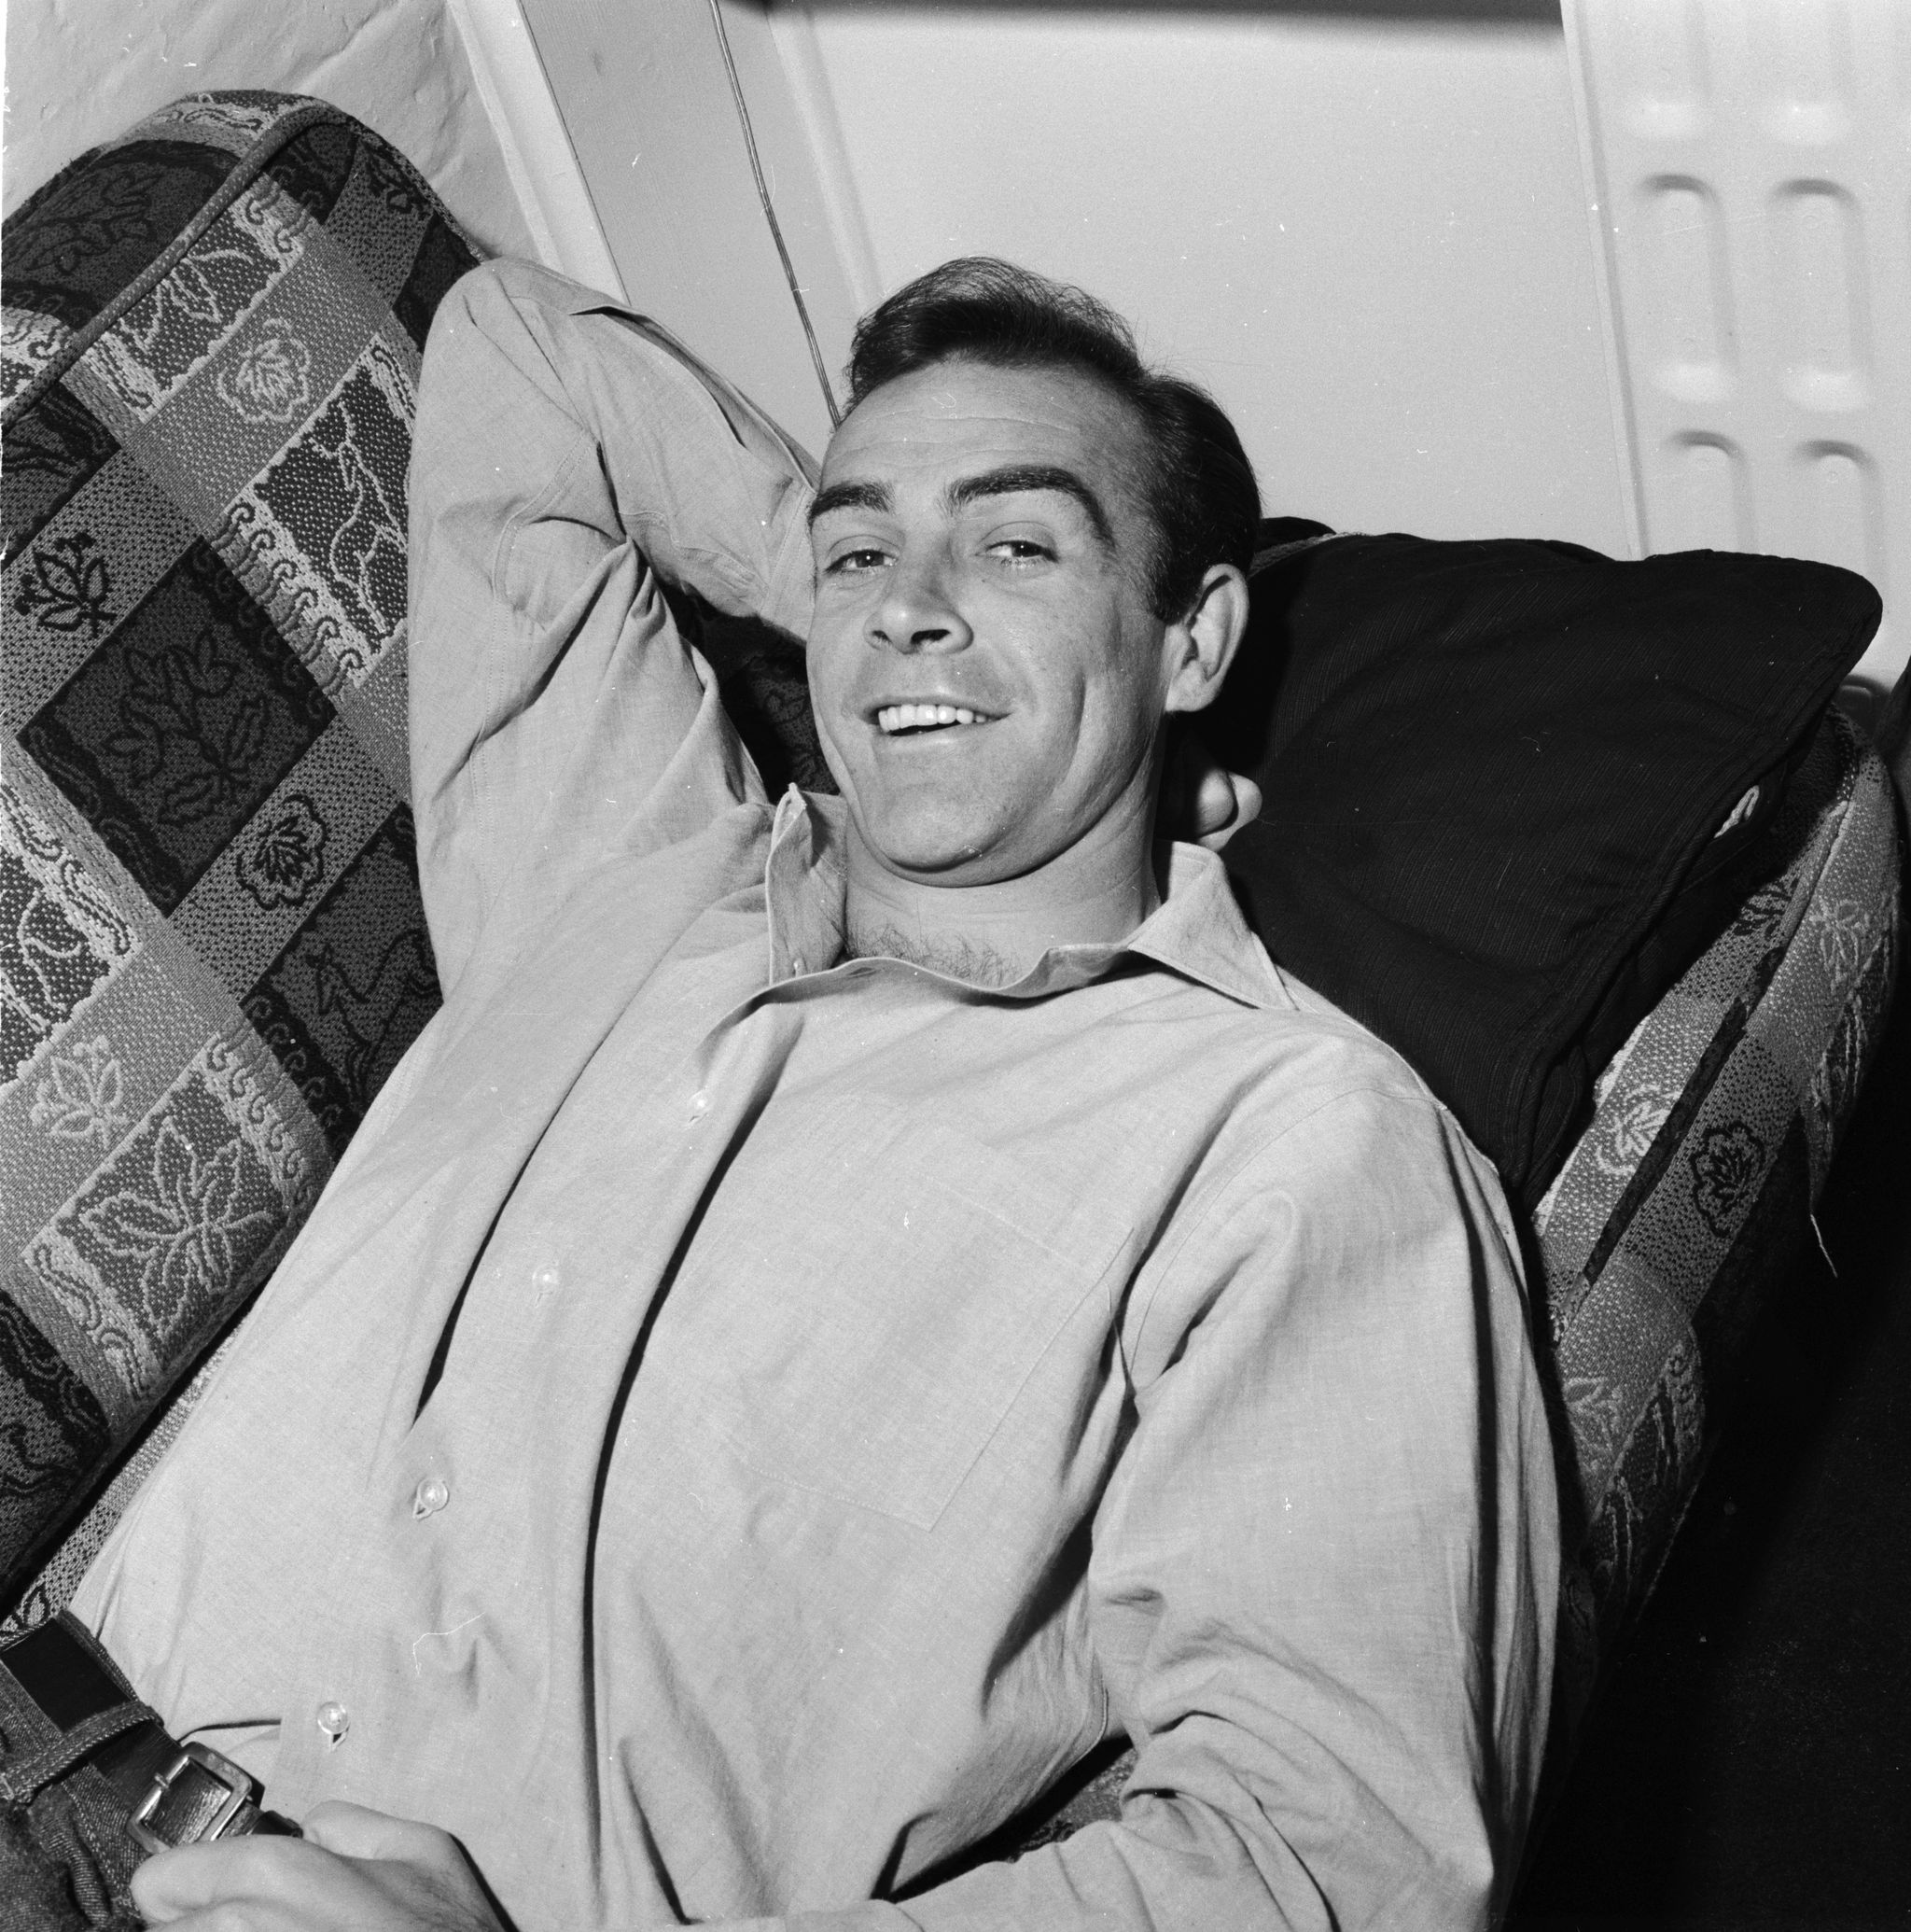 31st august 1962  scottish actor sean connery, the new face of superspy james bond, relaxes in his basement flat in londons nw8  photo by chris warekeystone featuresgetty images